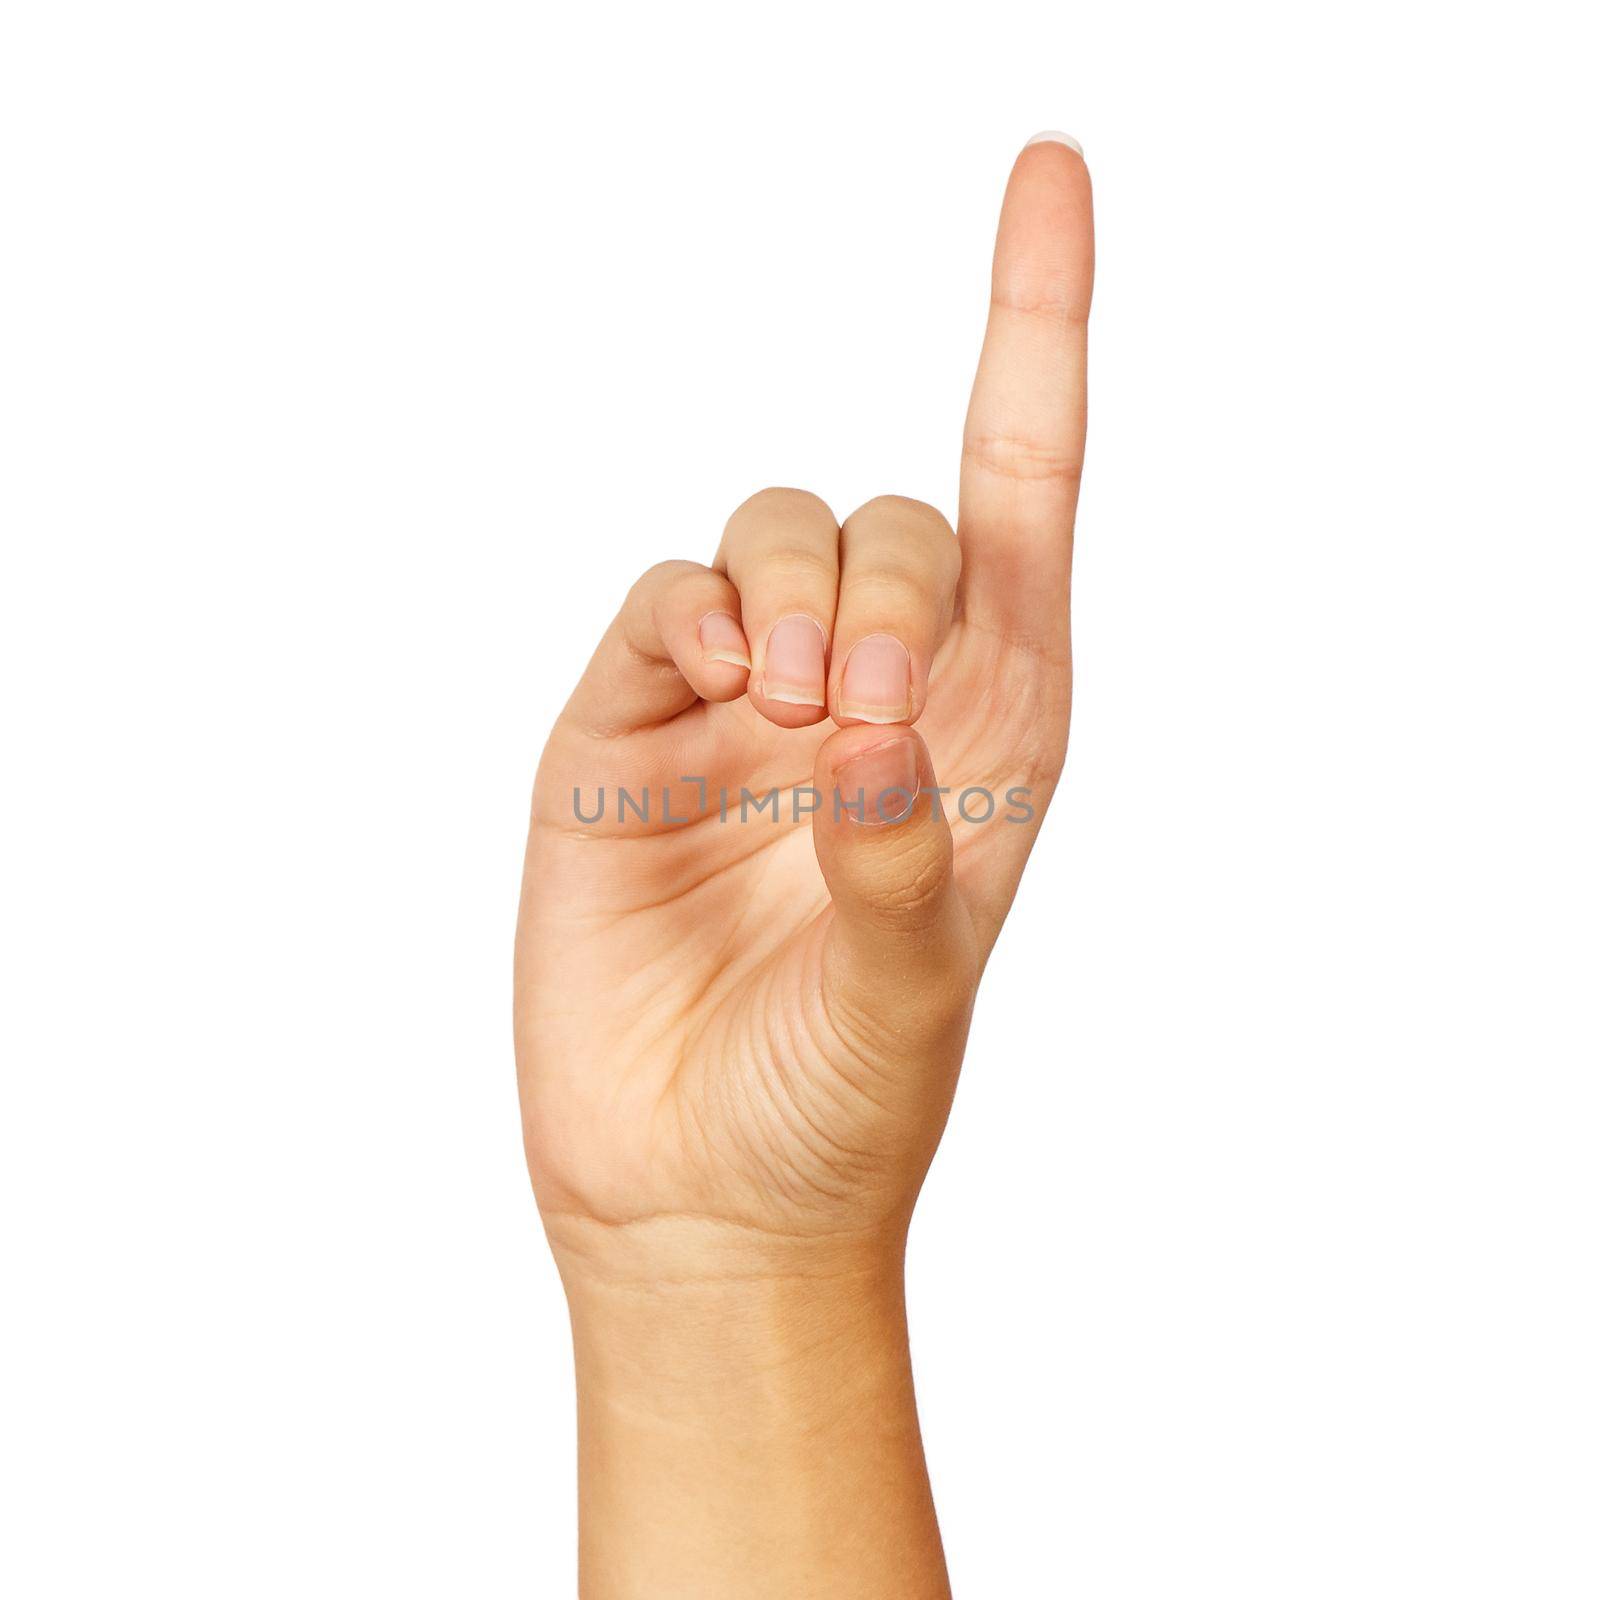 american sign language. female hand showing letter d. isolated on white background